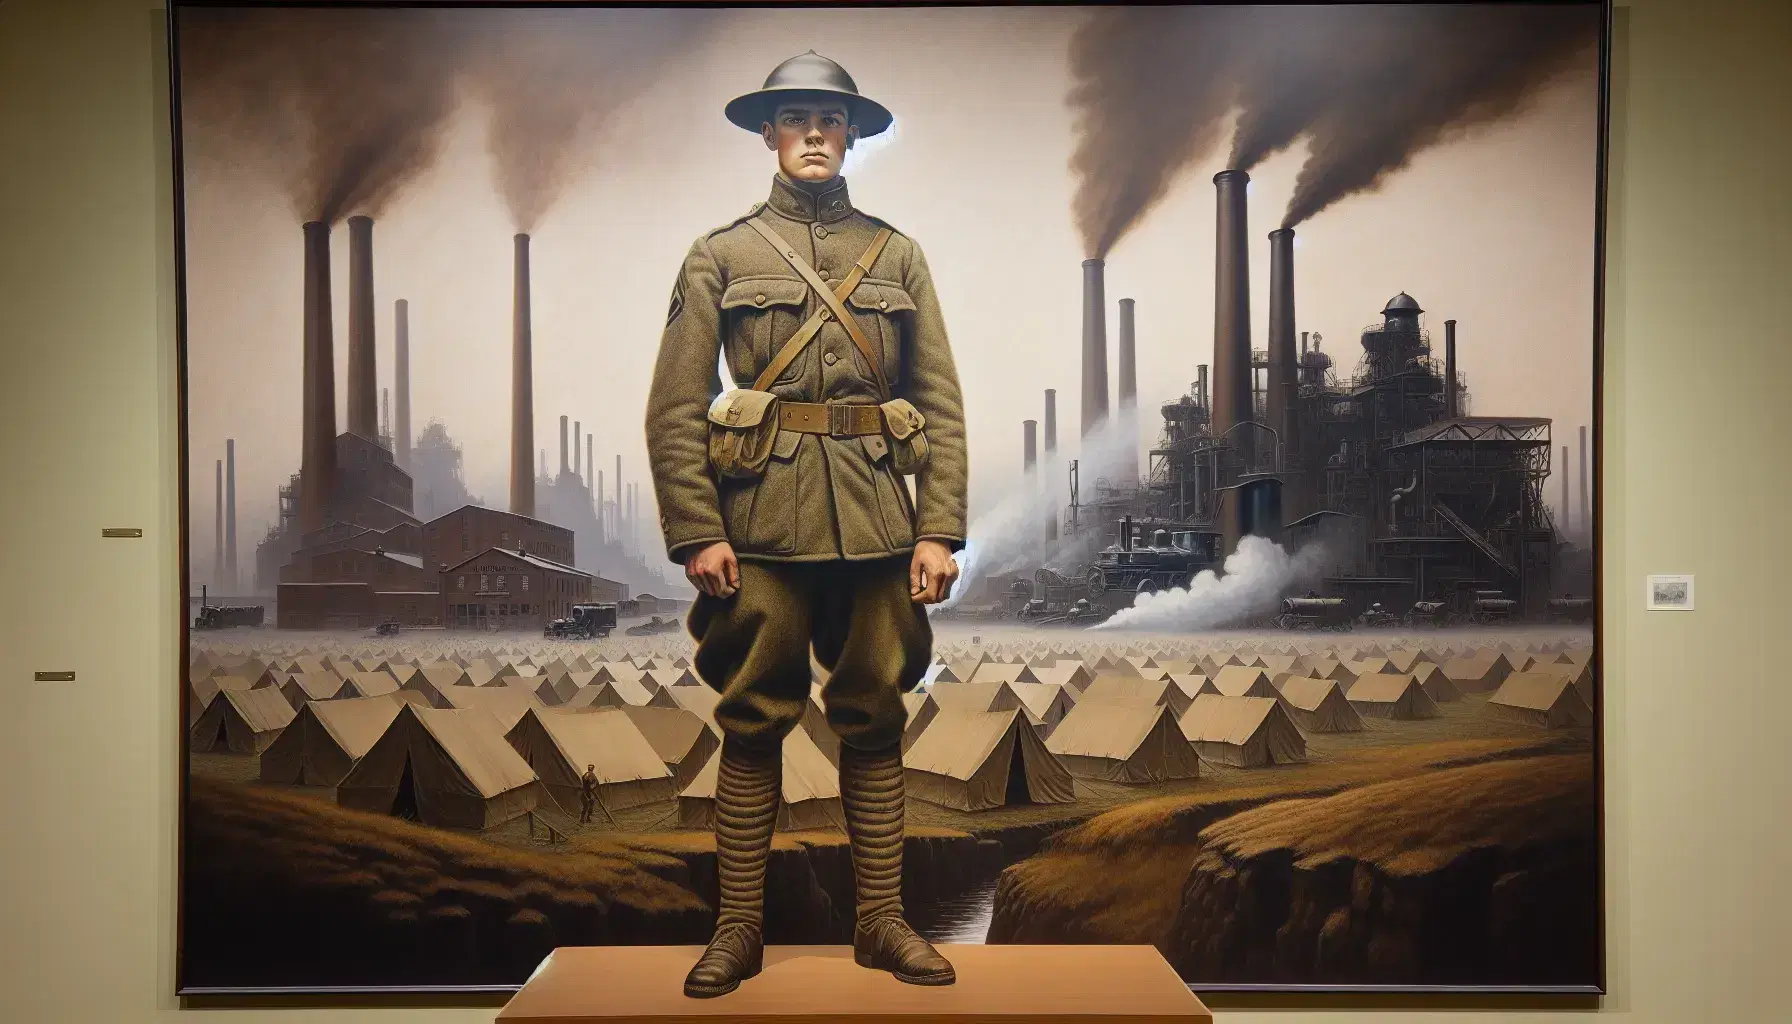 American soldier in World War I uniform in front of industrial landscape and military camp with tents.